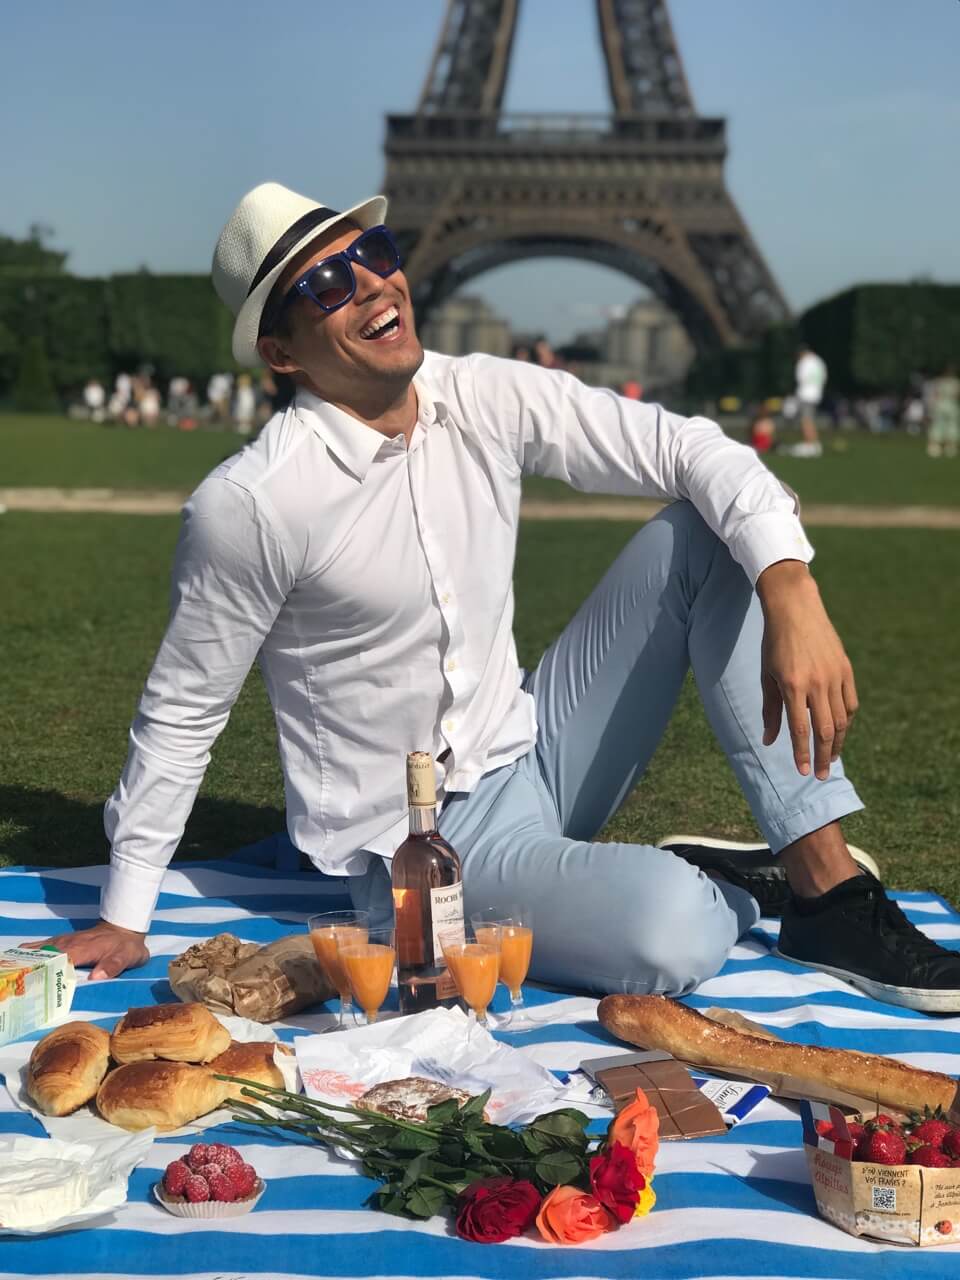 Pericles Rosa from the blog 7 Continents 1 Passport wearing a blue long trouser, white shirt, white hat and blue sunglasses having a picnic at Champs de mars with the Eiffel Tower in the background 